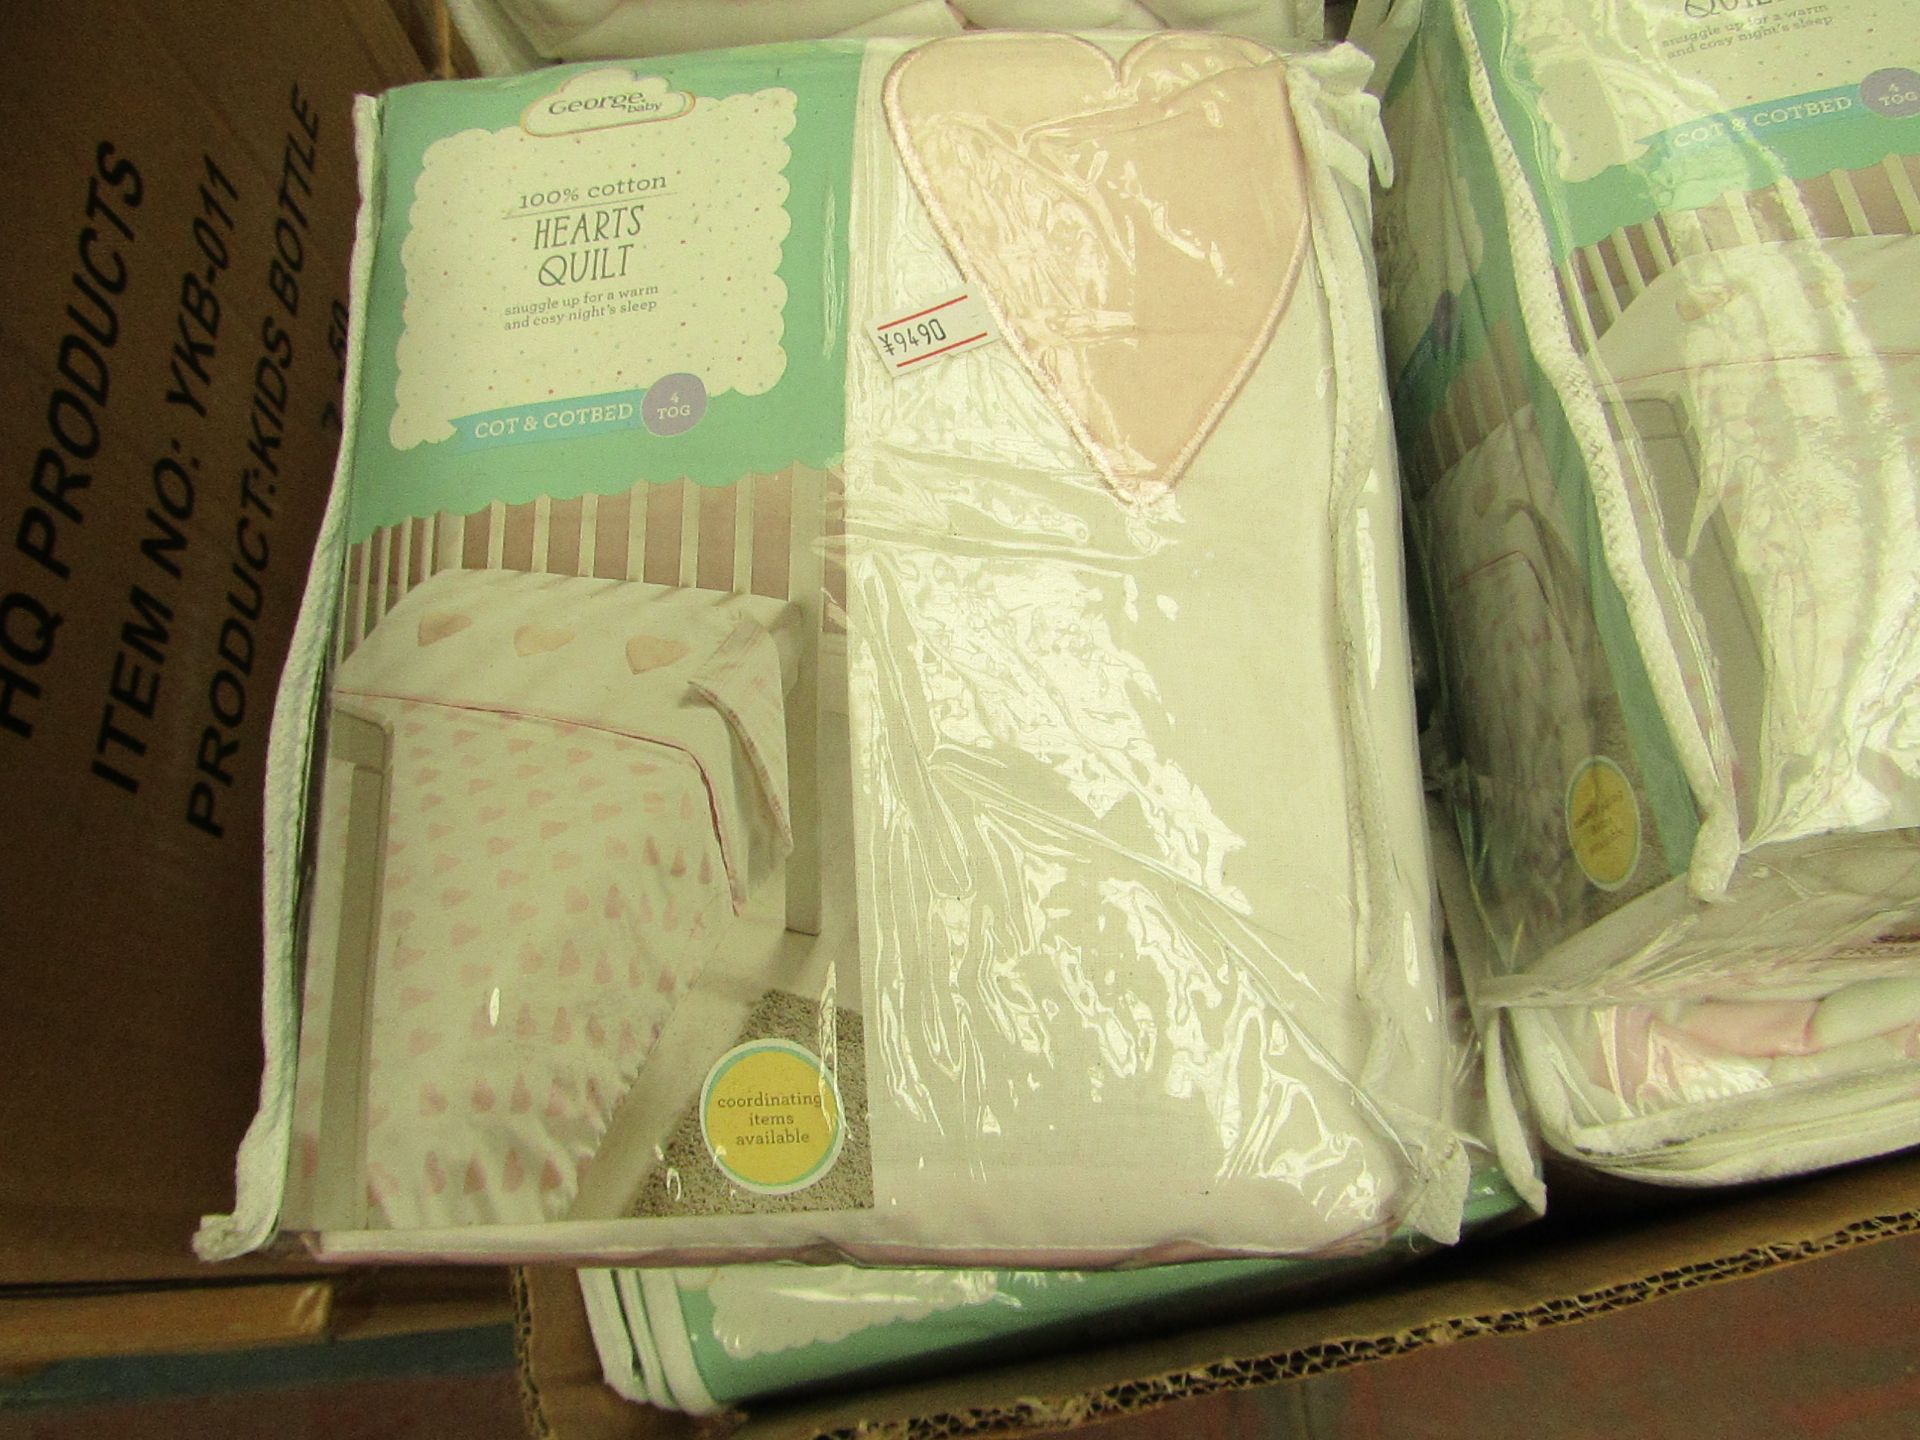 George Baby - Hearts Quilt (Cot & Cotbed) - All New & Packaged.